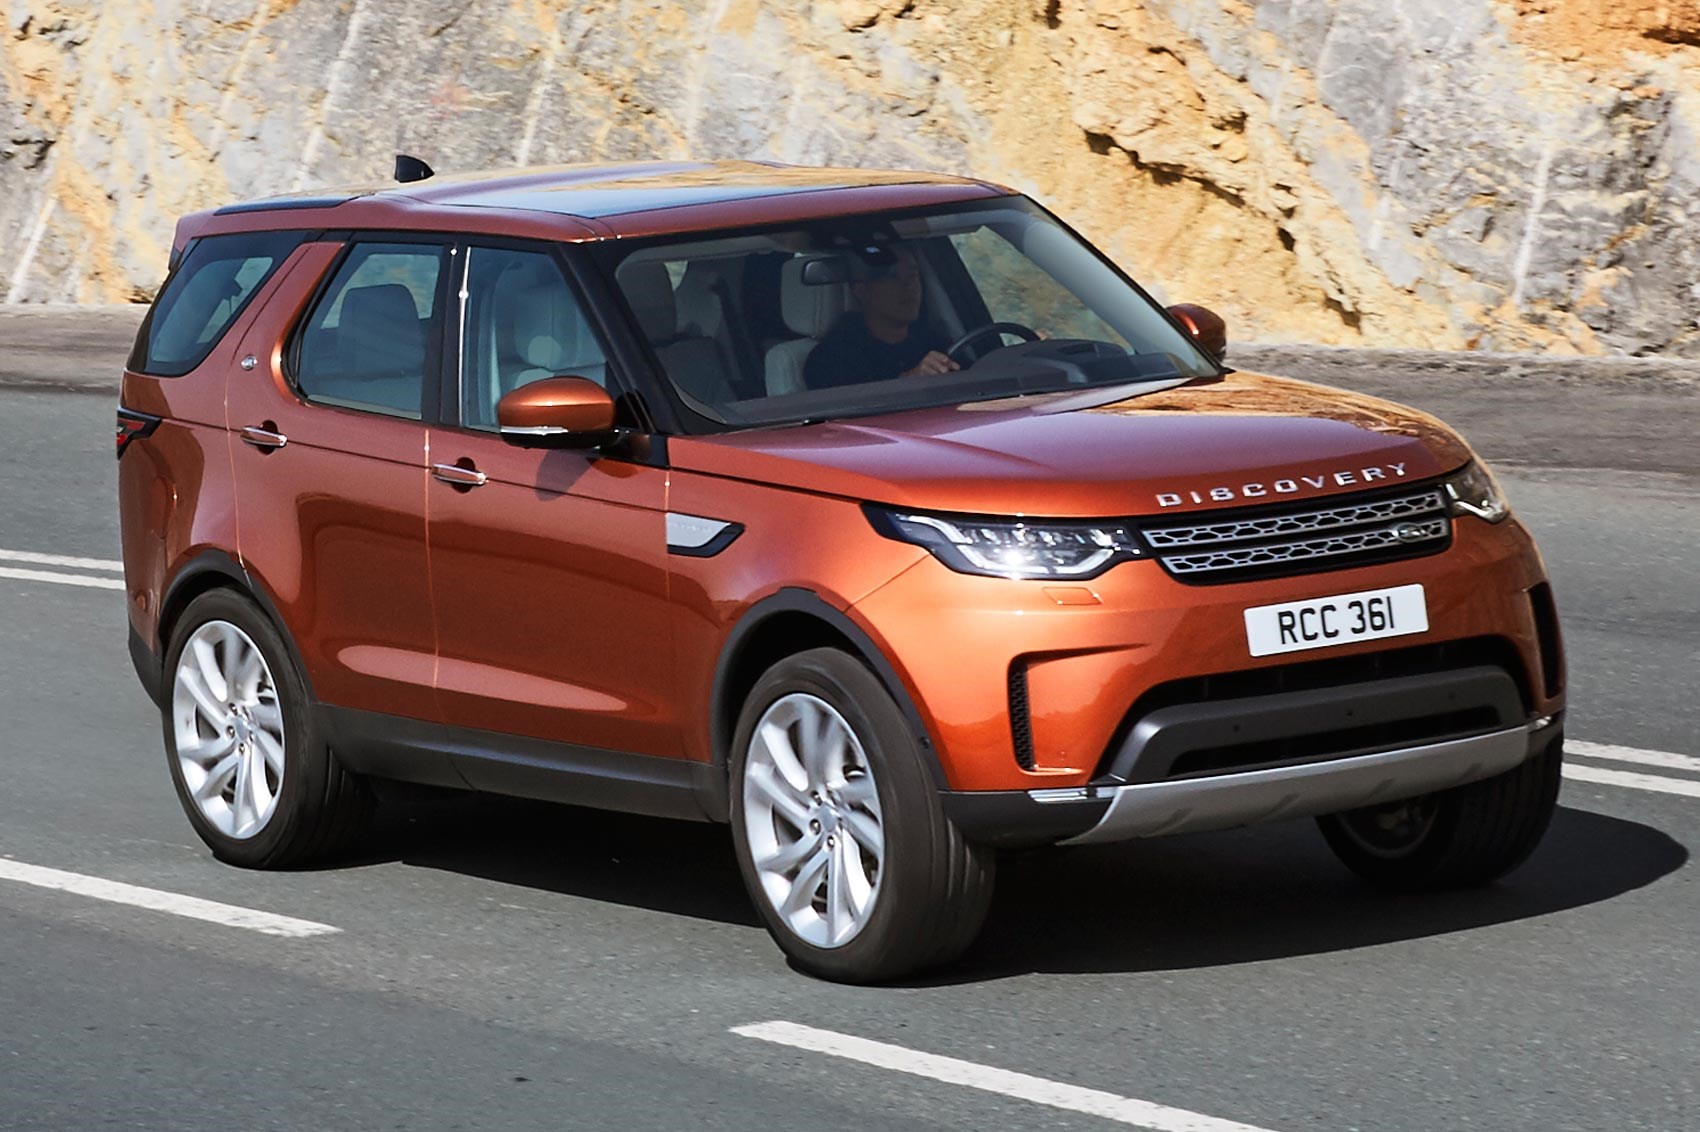 Amazing Land Rover Discovery Pictures & Backgrounds